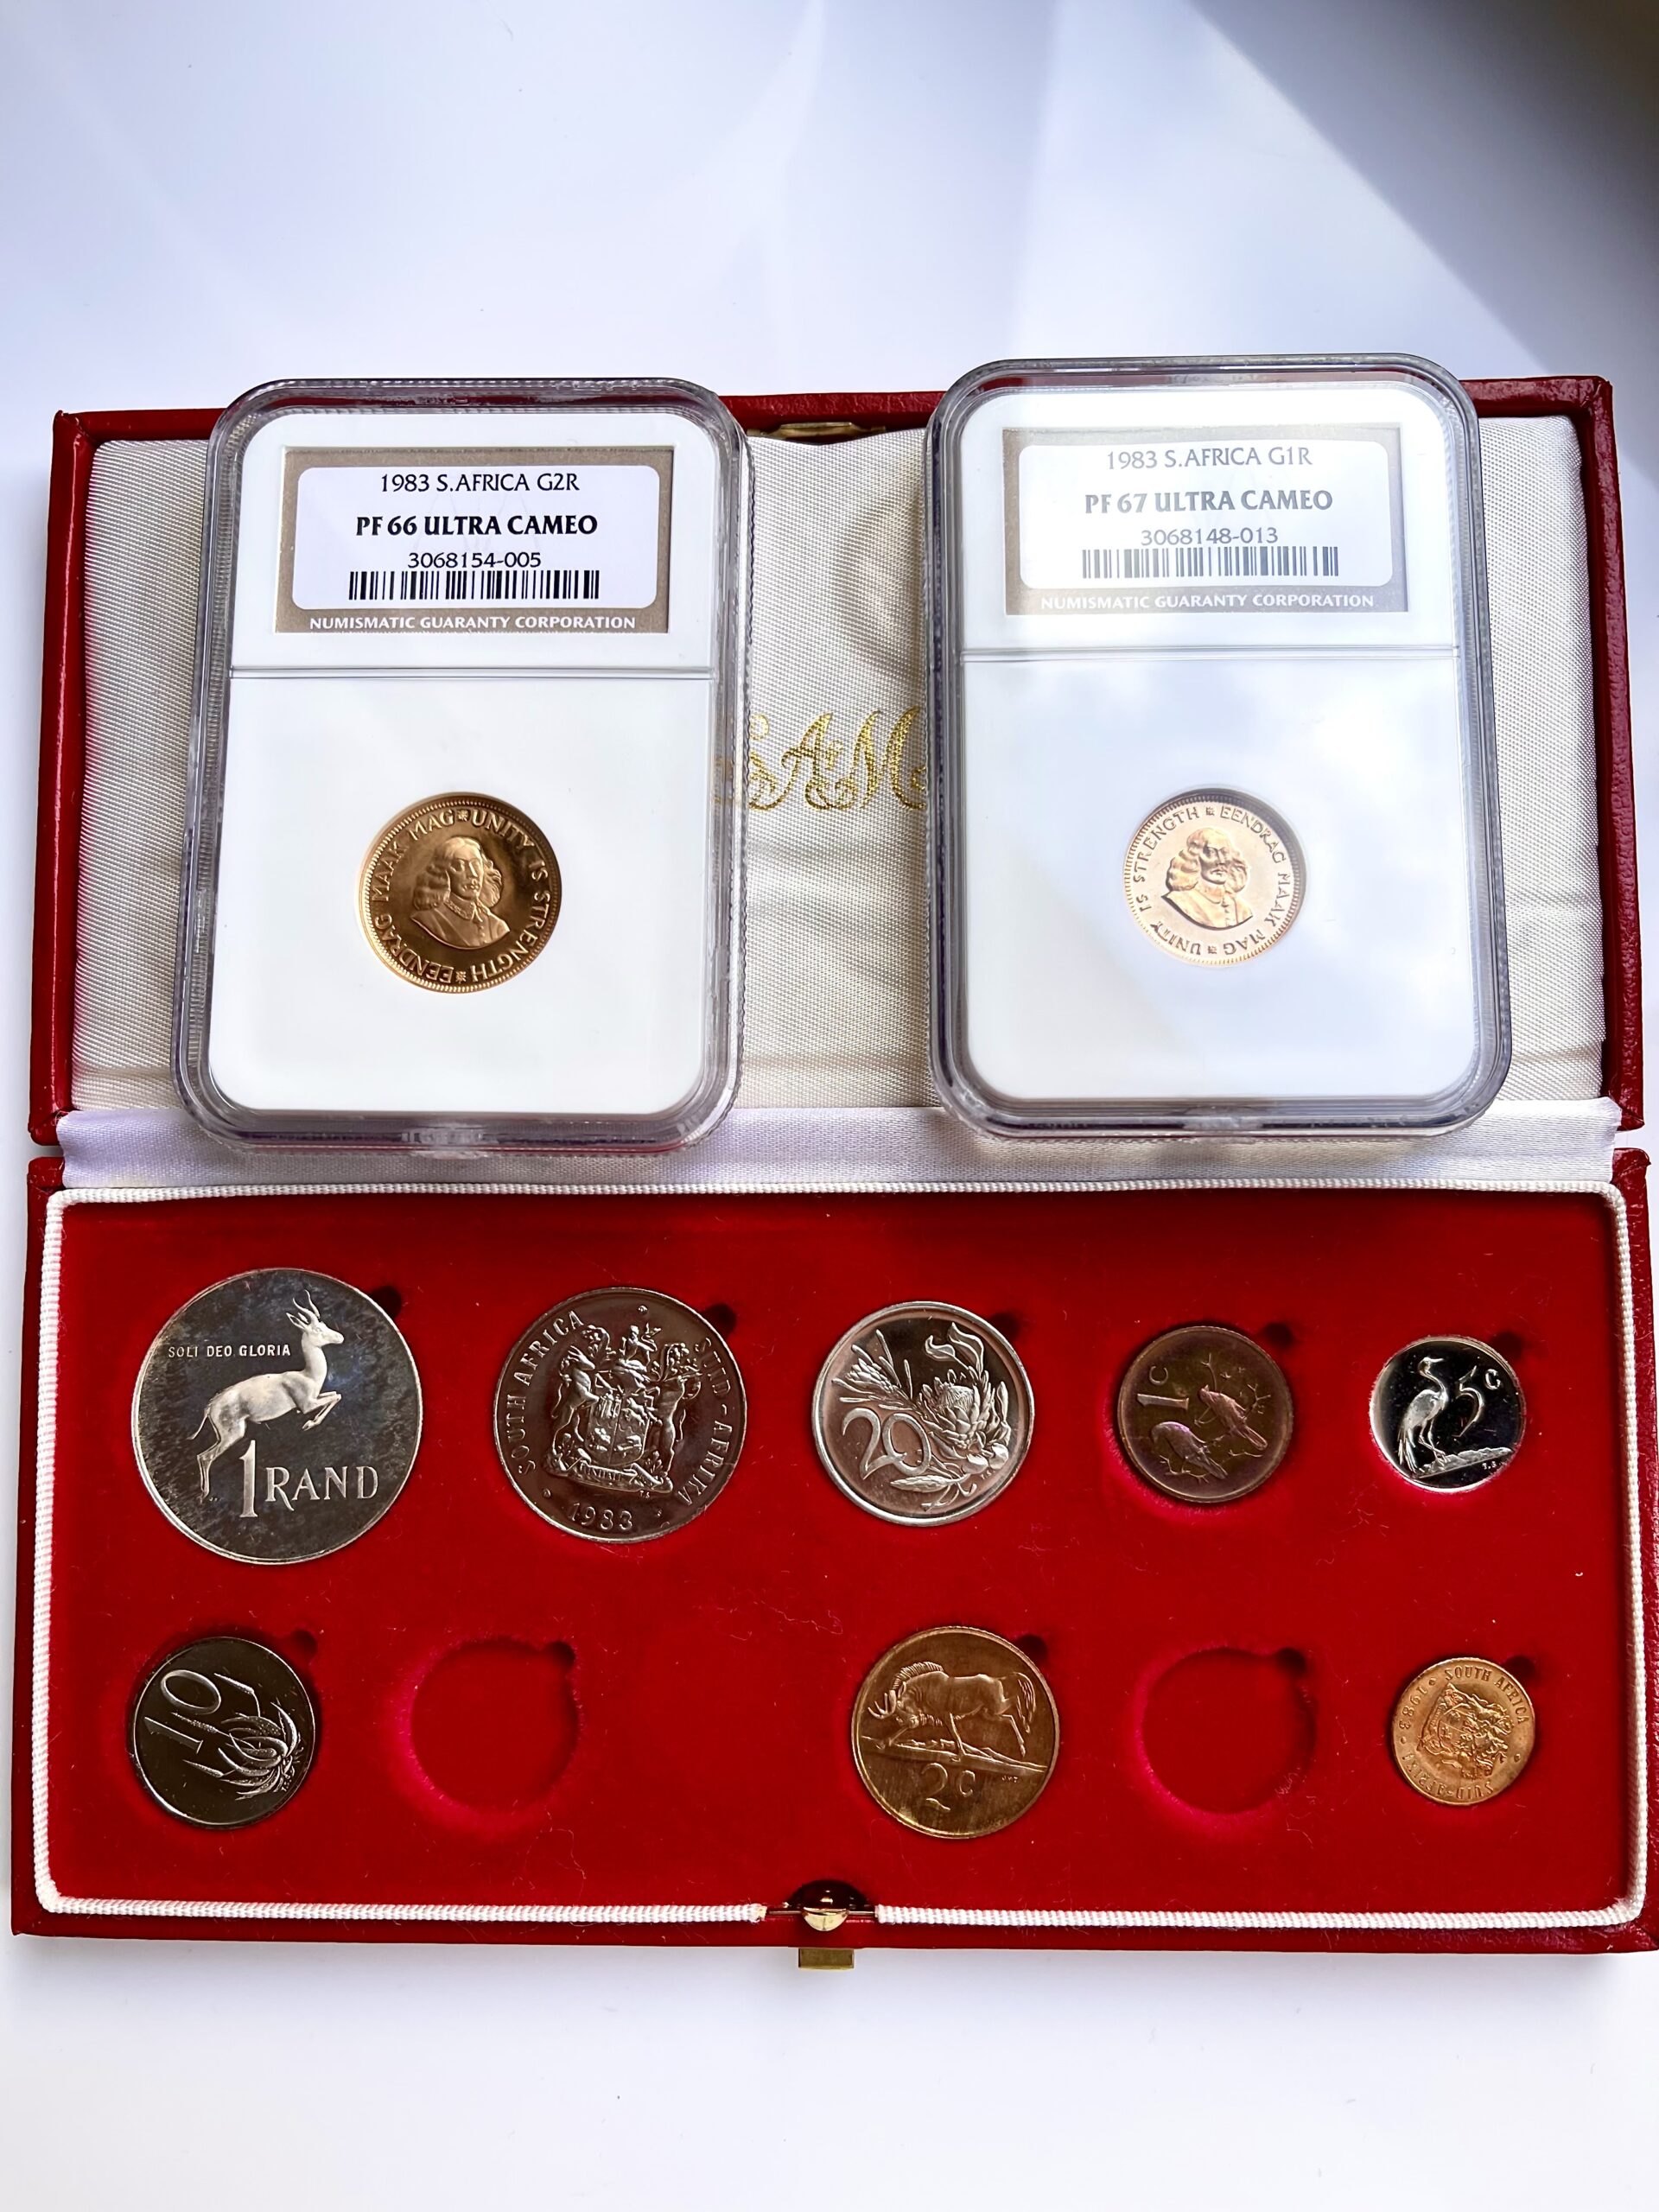 South Africa 1983 long proof set